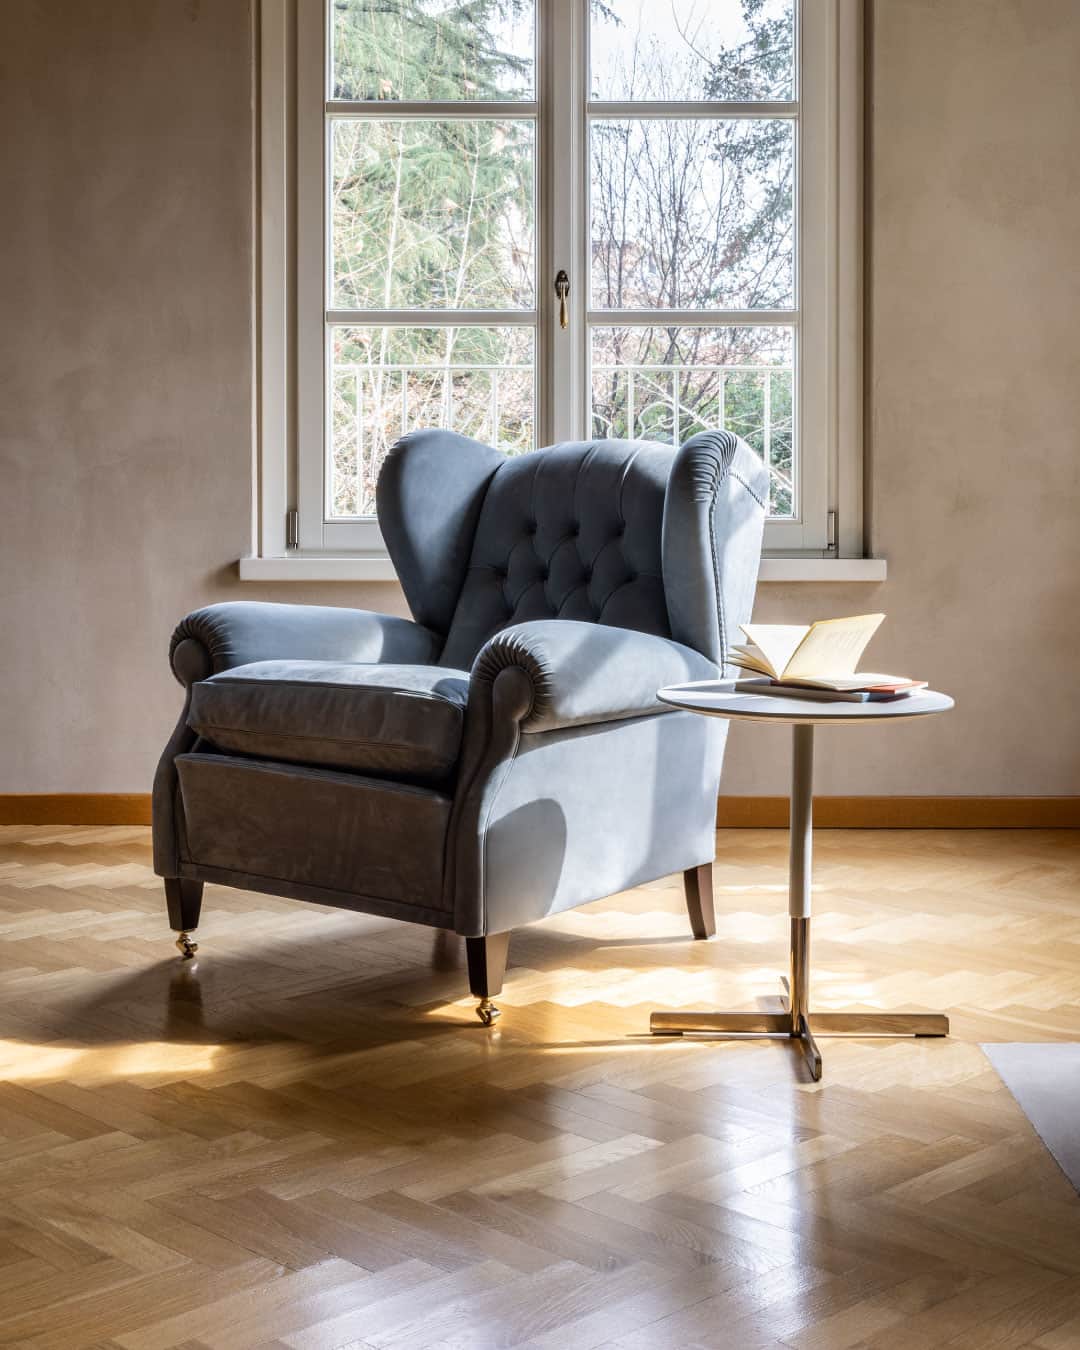 Poltrona Frauのインスタグラム：「Looking for the perfect seating solution for a sunlit corner? Check out the 1919 armchair designed by Renzo Frau and imagine yourself sinking into its luxurious leather upholstery.  What will you choose for entertainment, a good book or movie night?   #PoltronaFrau #RenzoFrau」